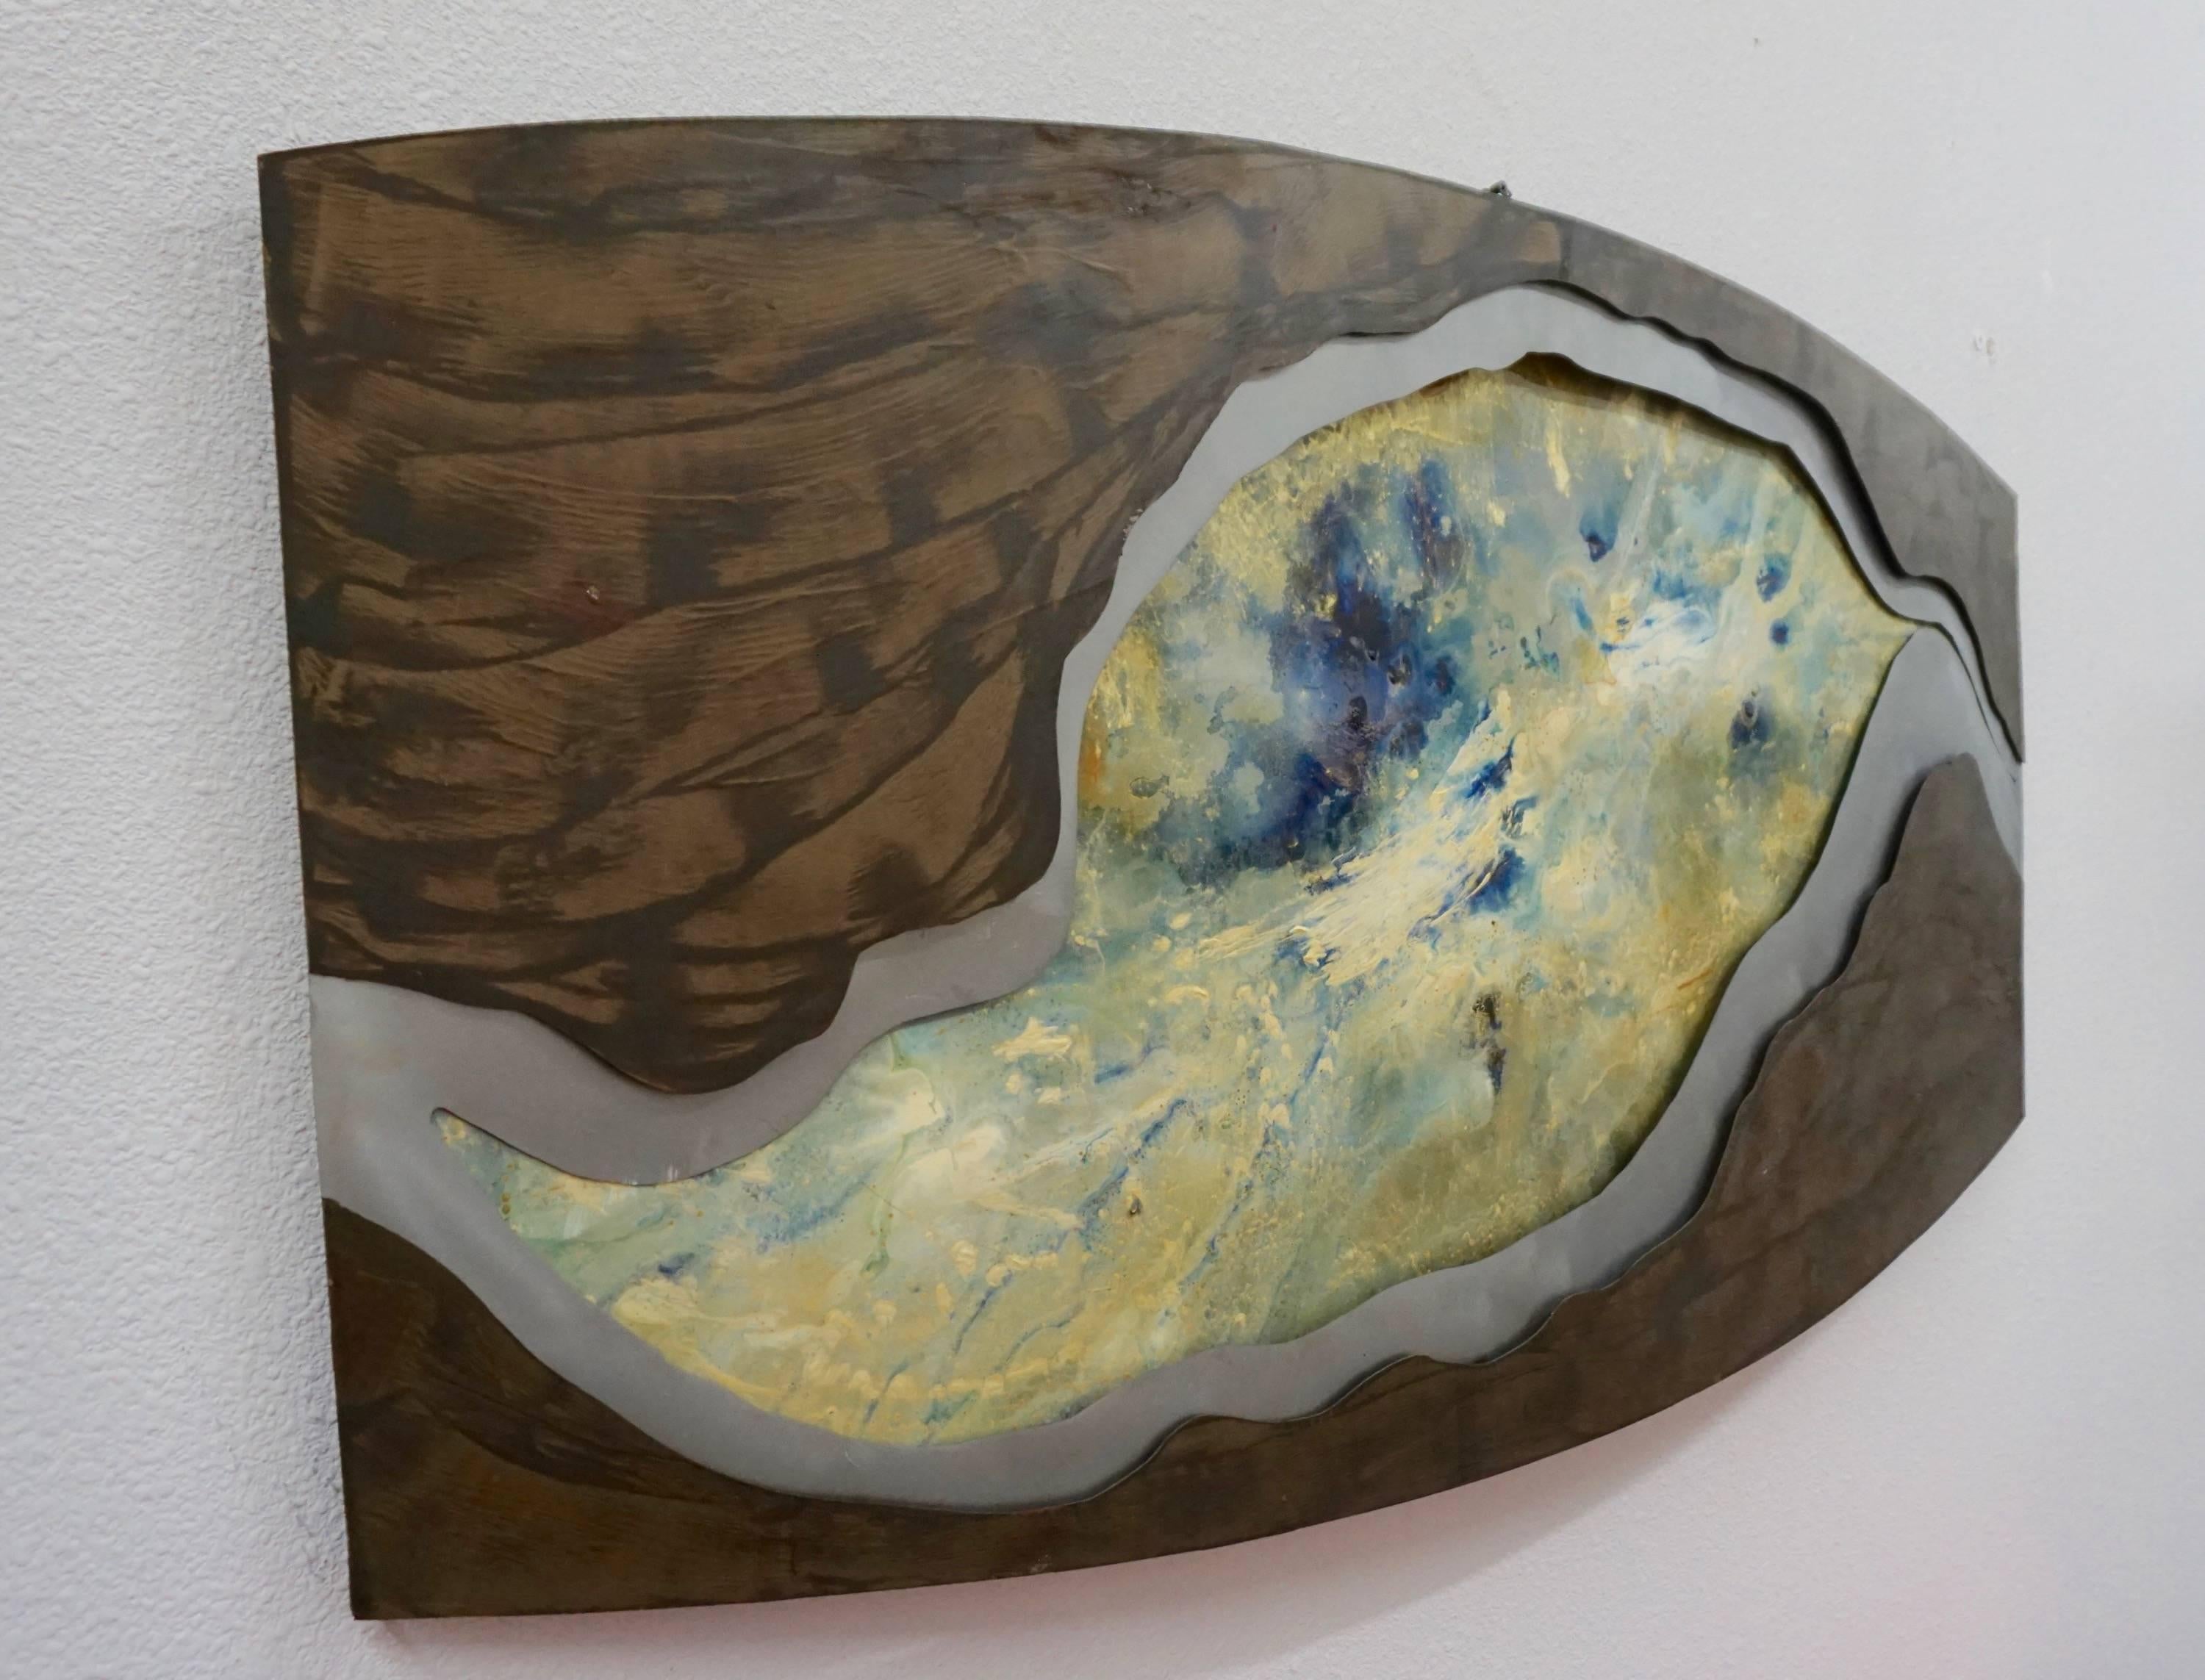 Three layers of sheet metal mounted together and painted to create this surreal work of art.